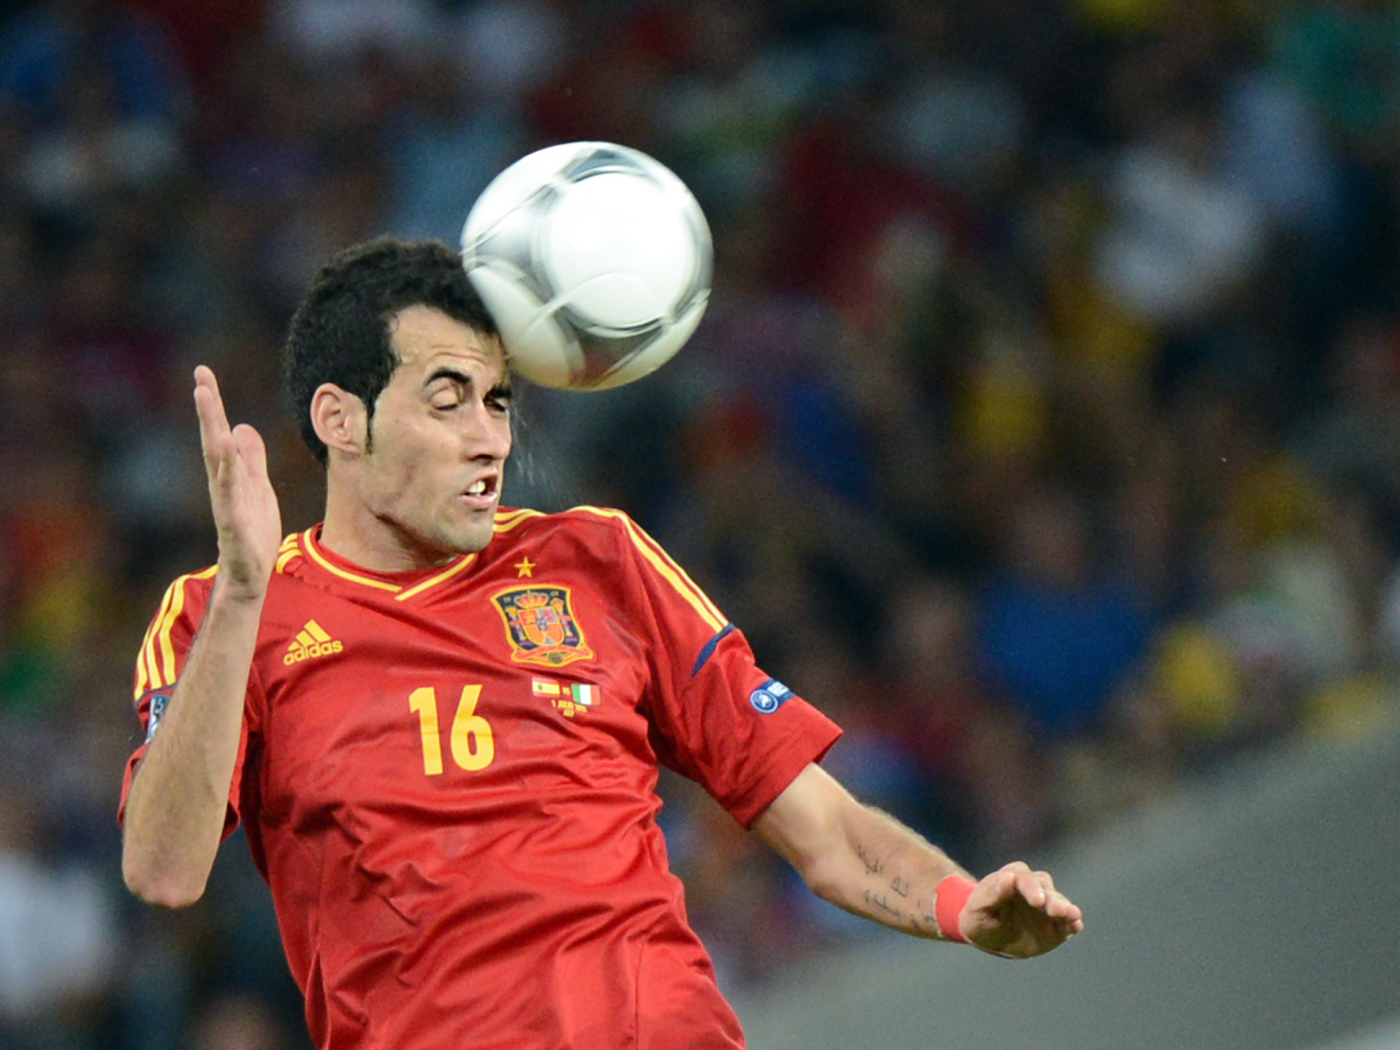 The best football player of Barcelona Sergio Busquets strikes with his head